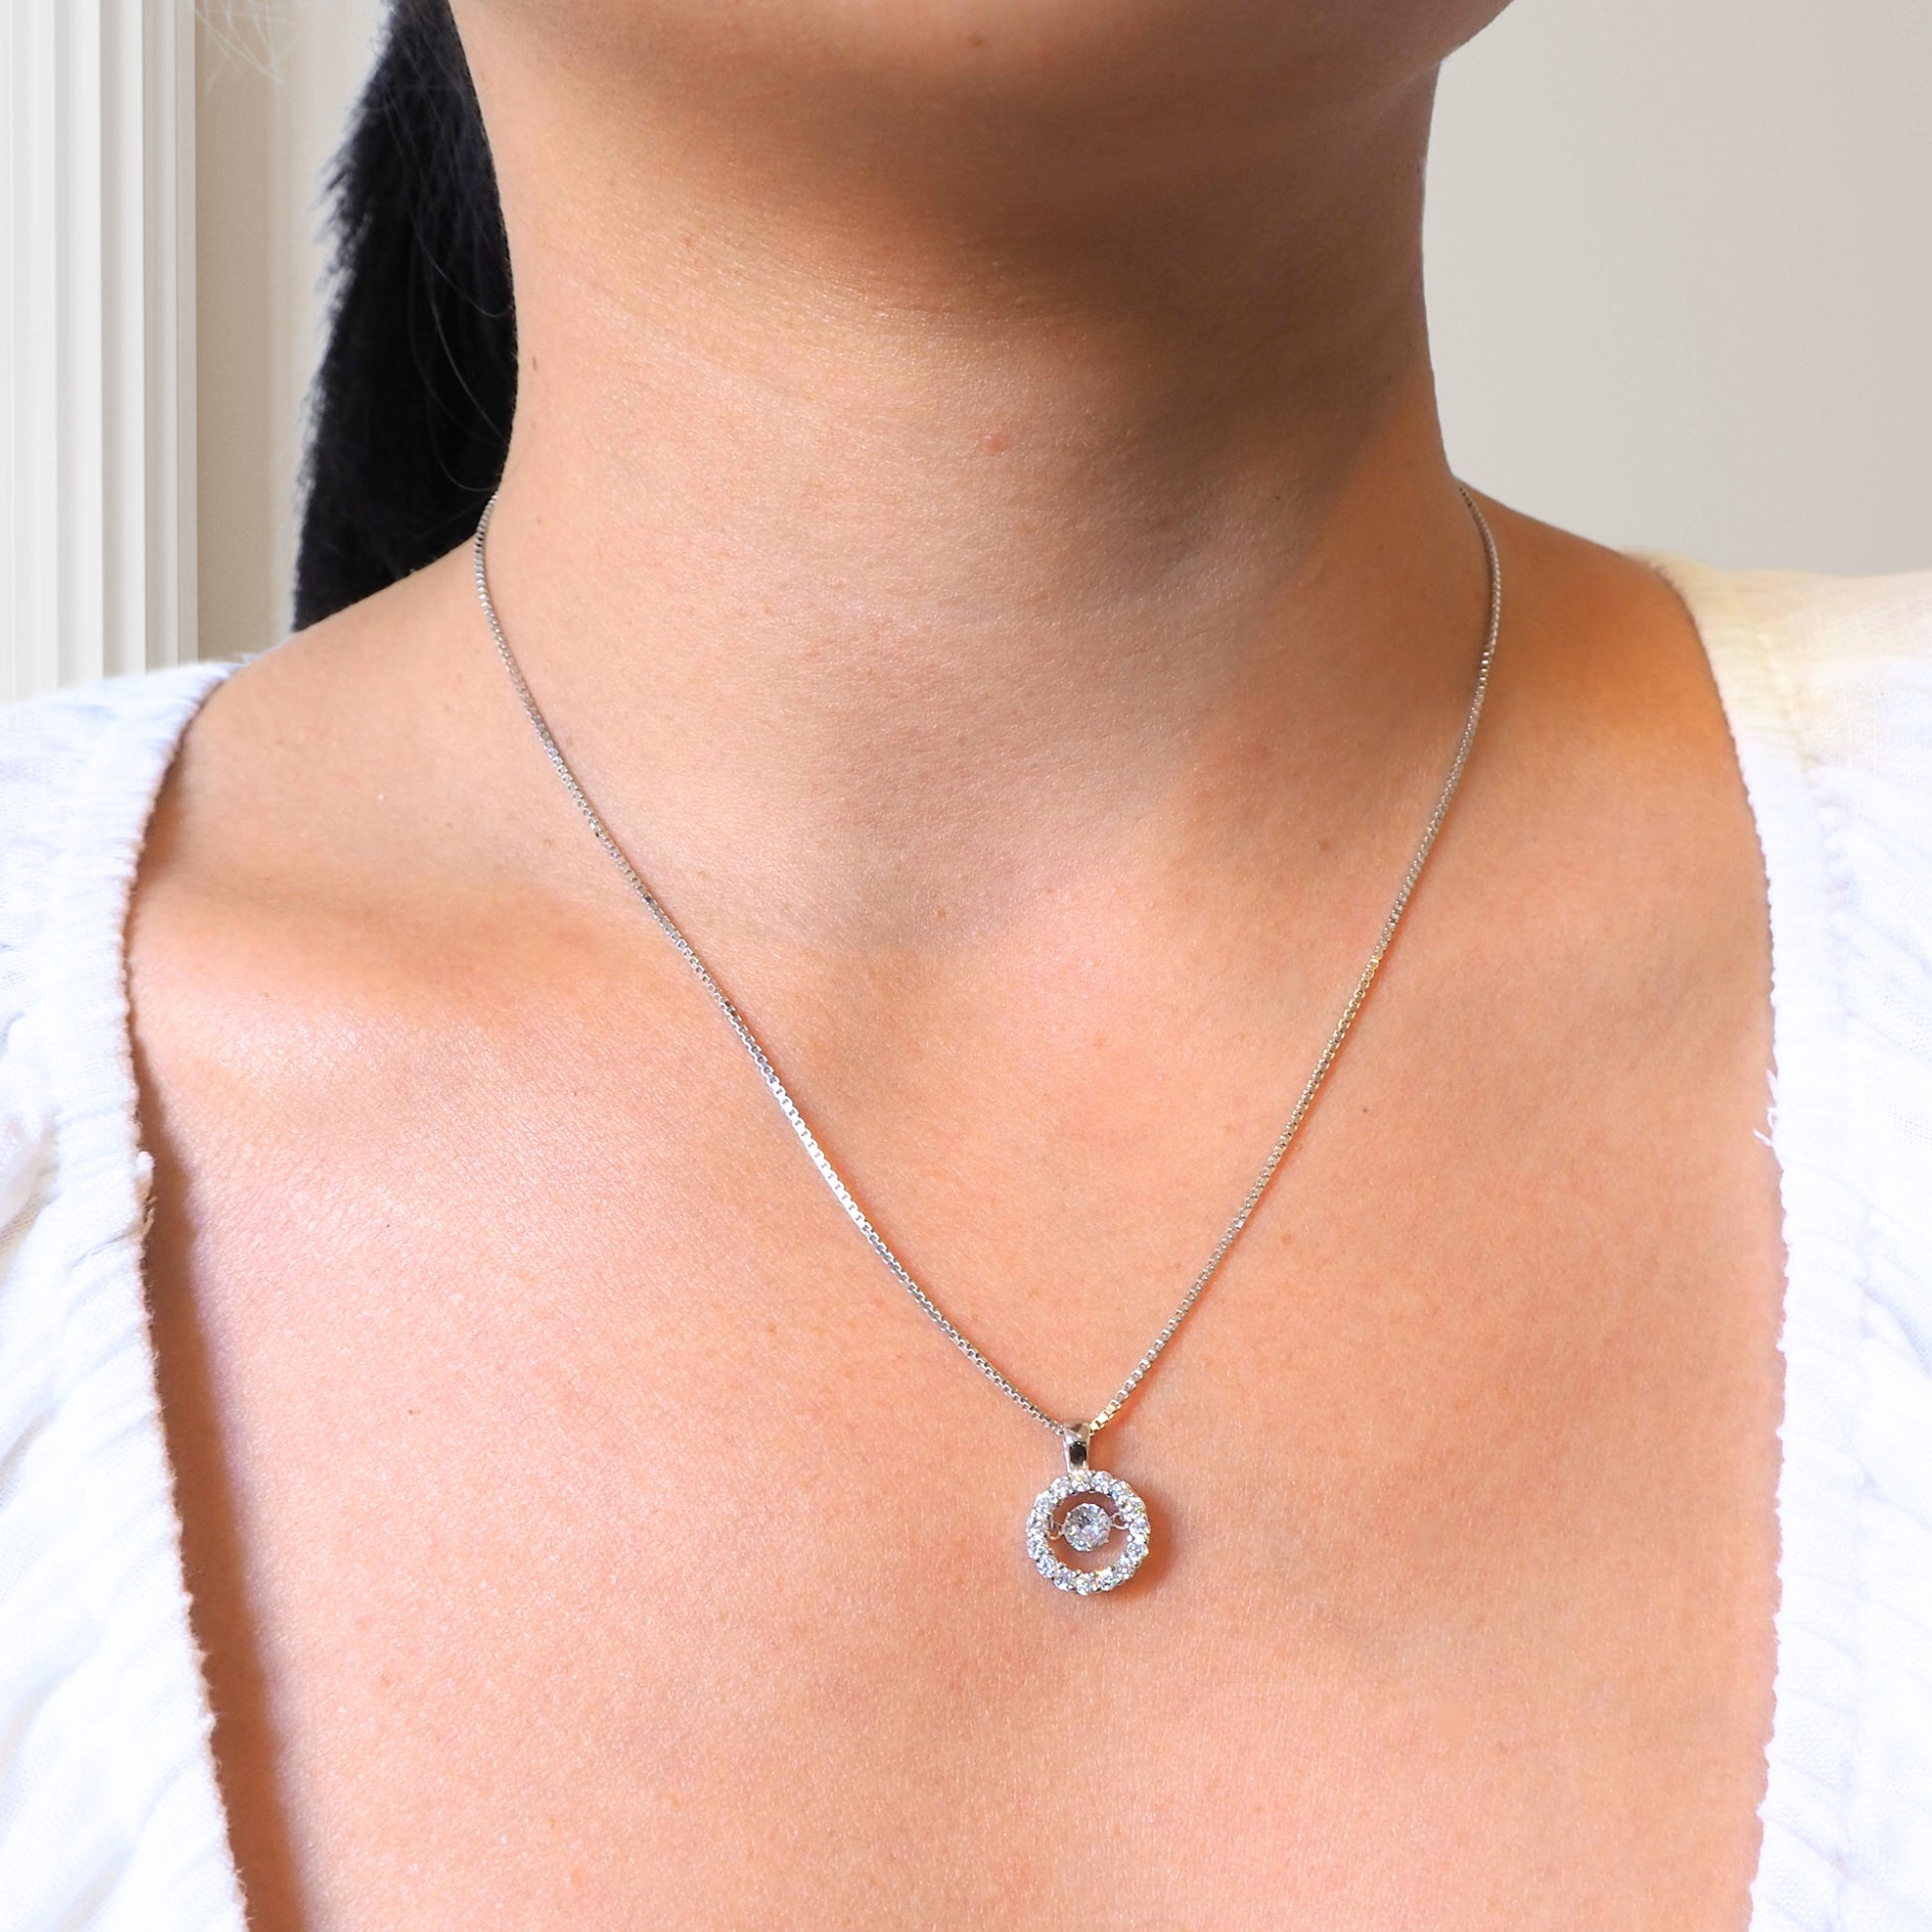 Sterling Silver Necklace set - Silver Box Chain Necklace 16 inches with round pendant